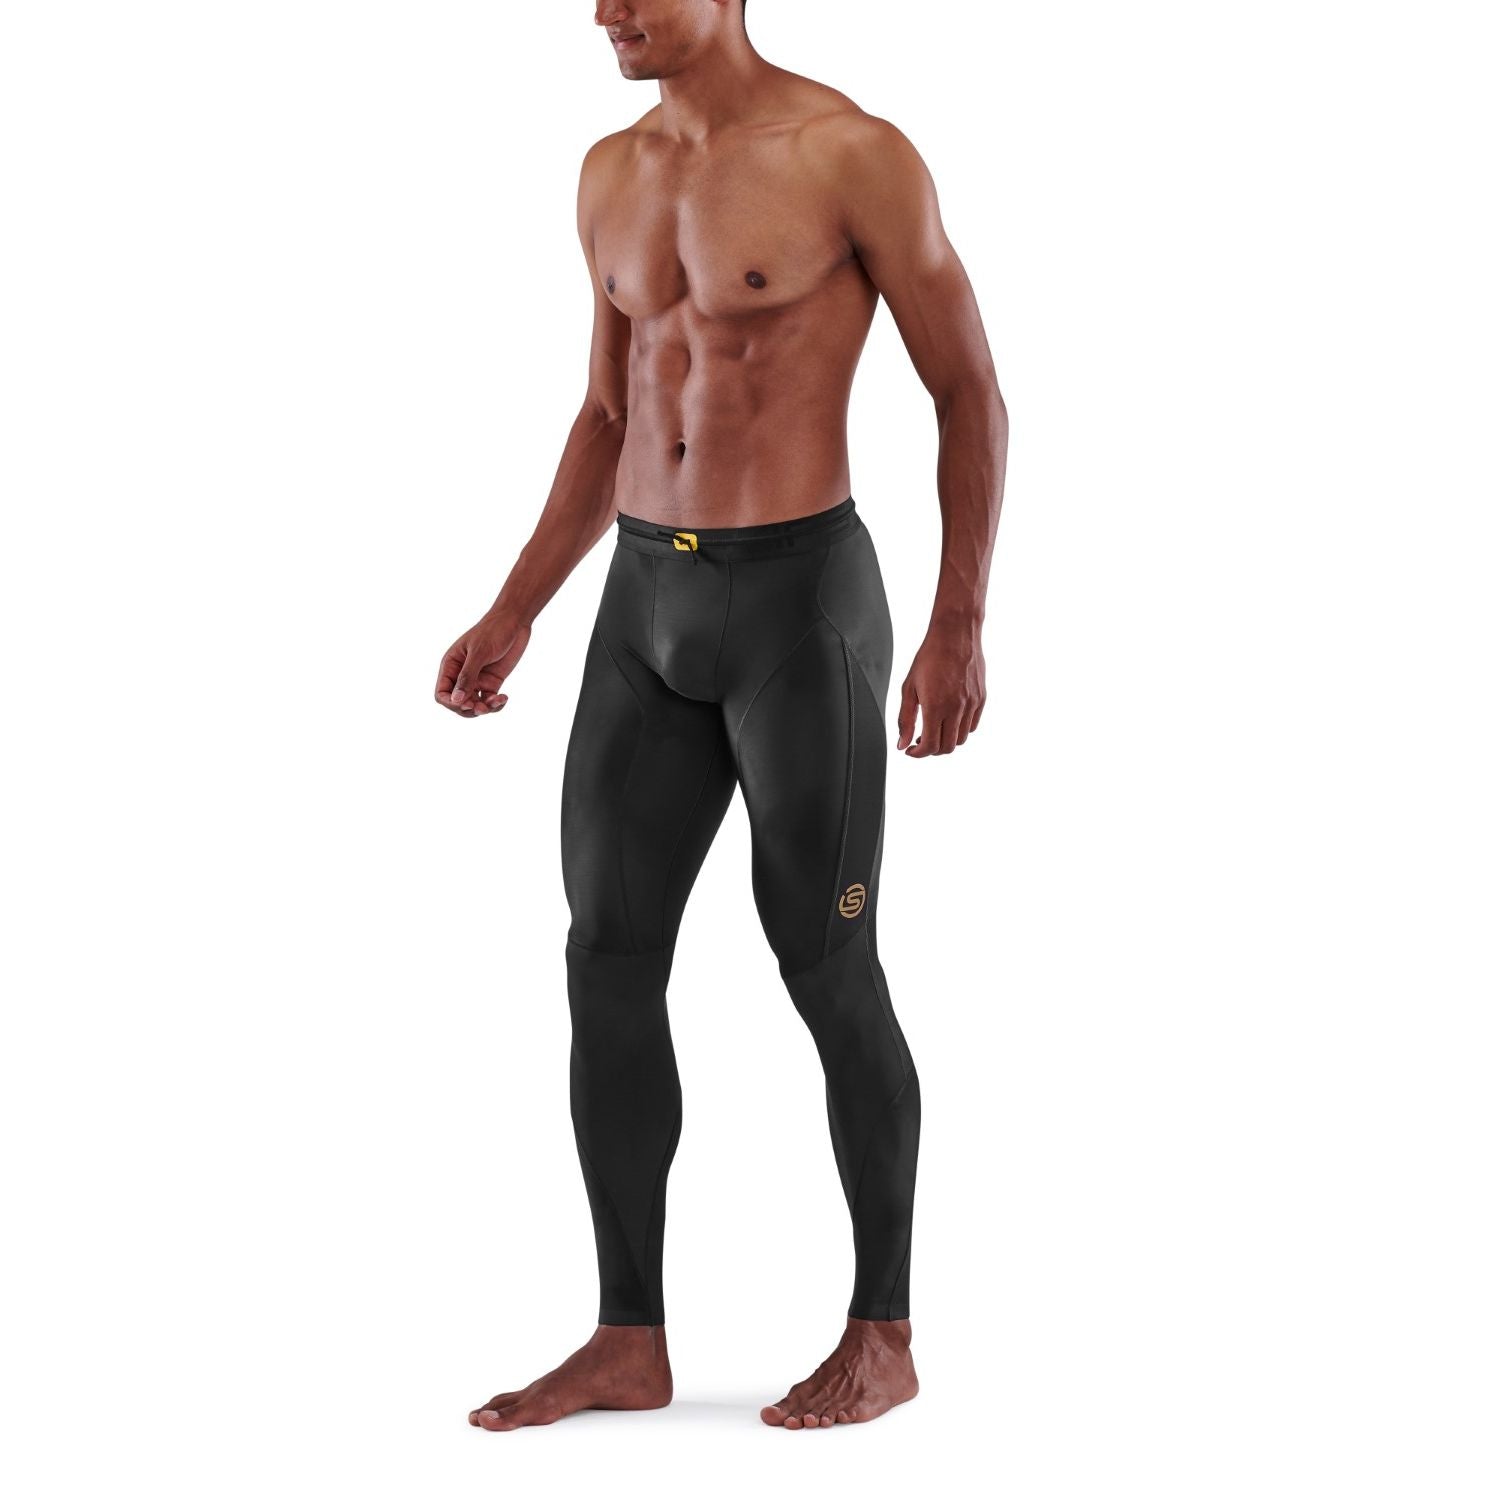 SKINS SERIES-5 MEN'S TRAVEL AND RECOVERY LONG TIGHTS NAVY BLUE